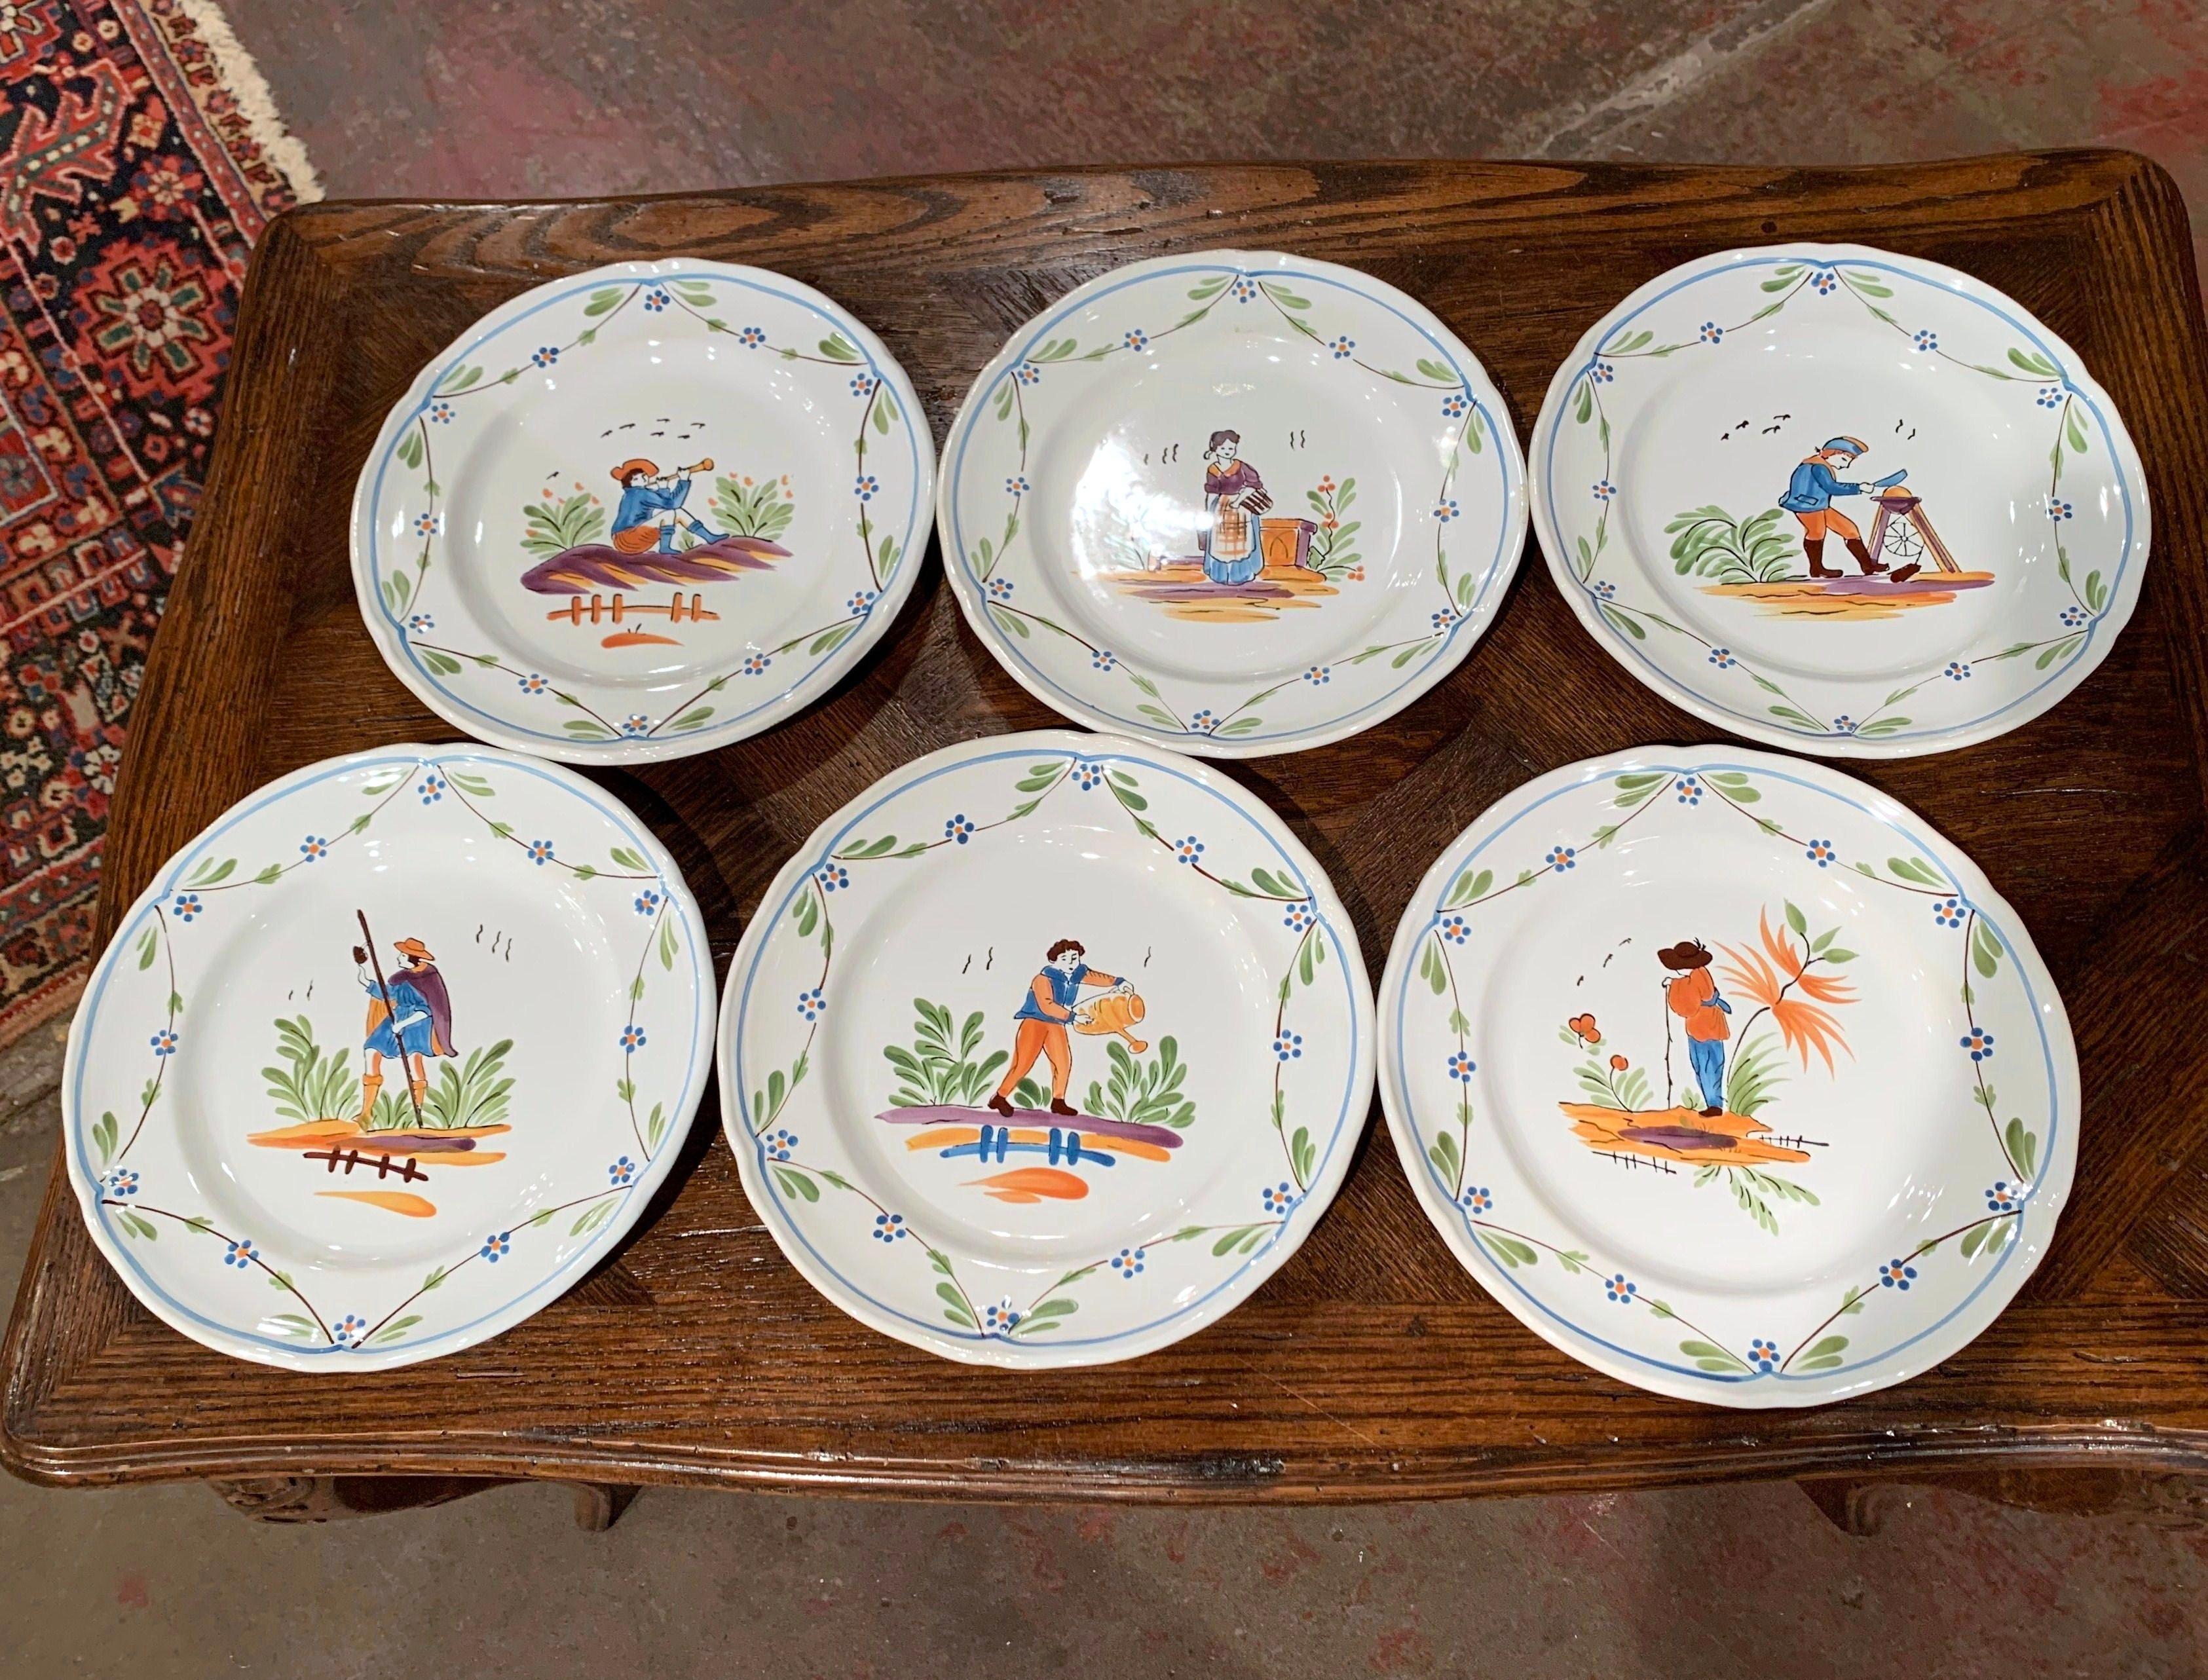 Decorate a kitchen wall or fill up a decorative hutch with this elegant set of hand painted, ceramic plates. Crafted circa 2000 in Pornic, France, each colorful plate is hand painted with floral and leaf decor, and depicts Breton people at work in